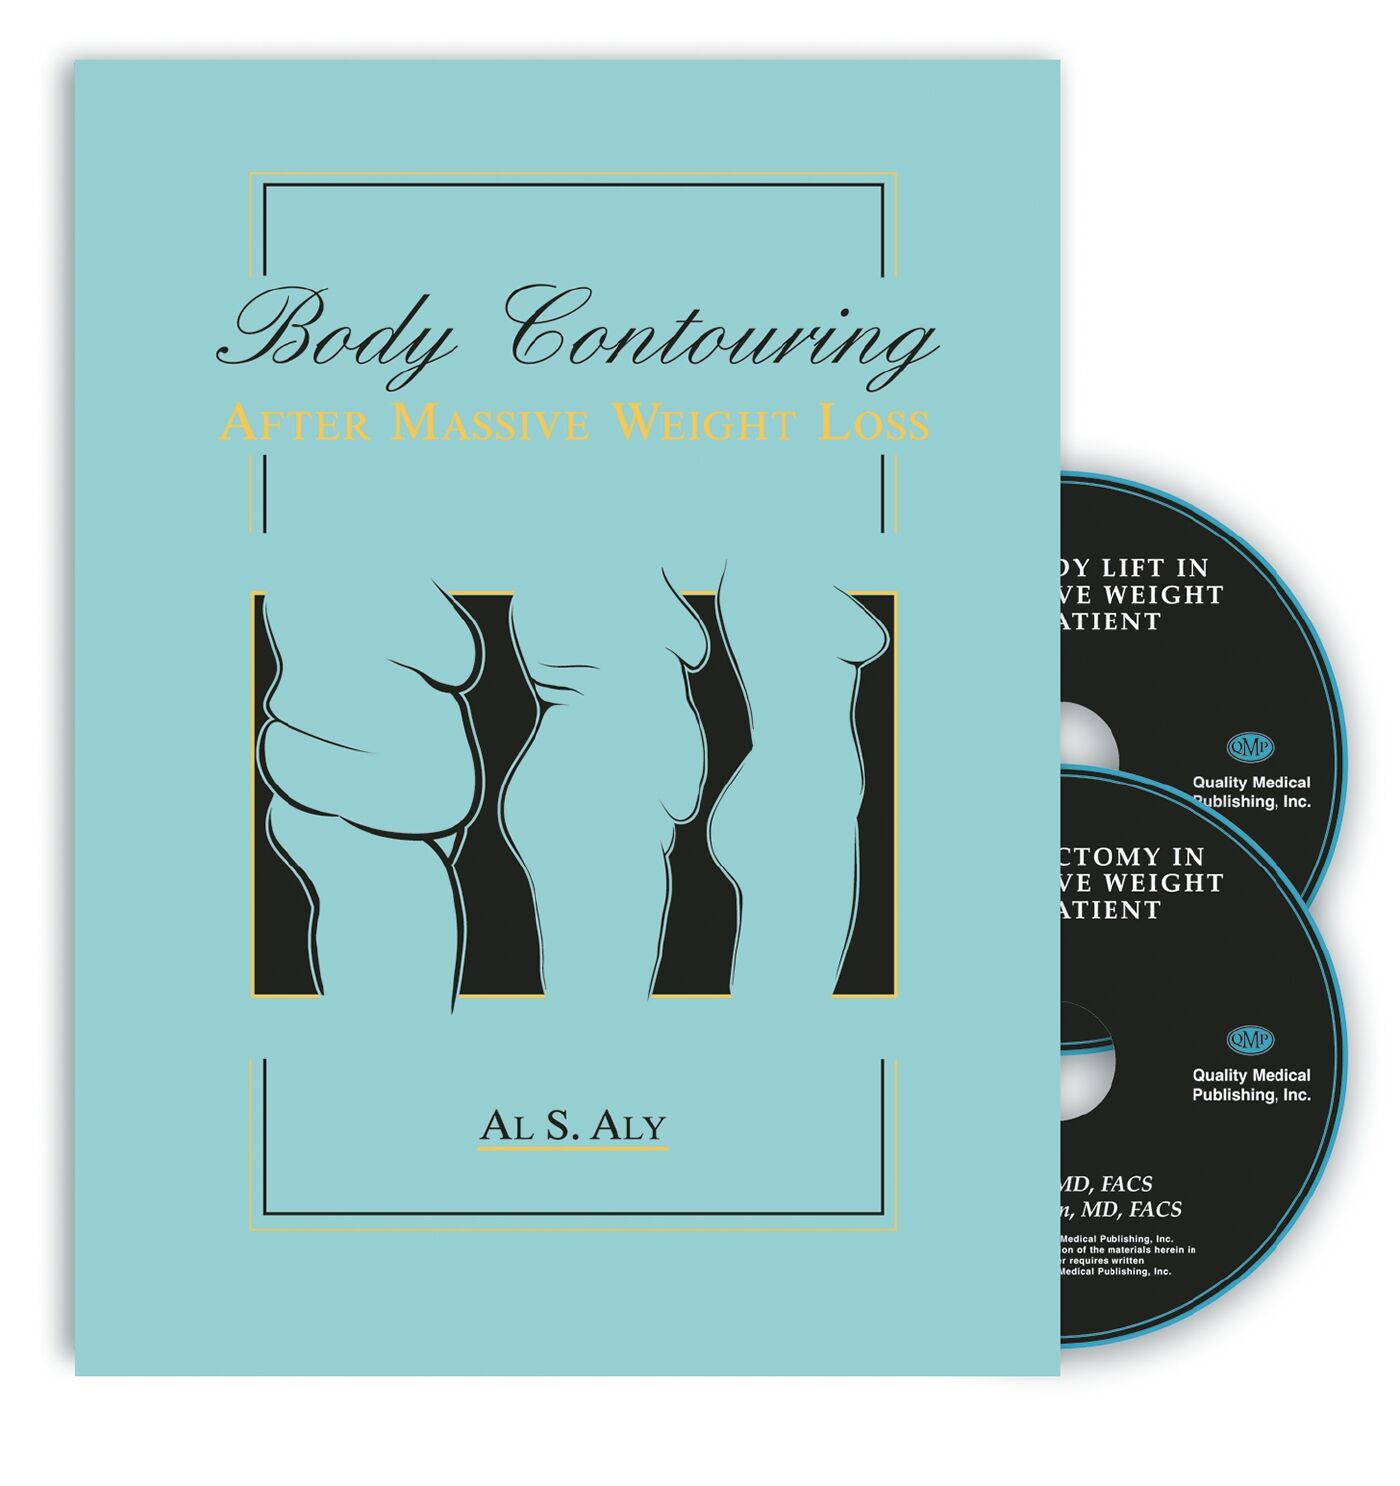 Body Contouring after Massive Weight Loss, 9781626236073